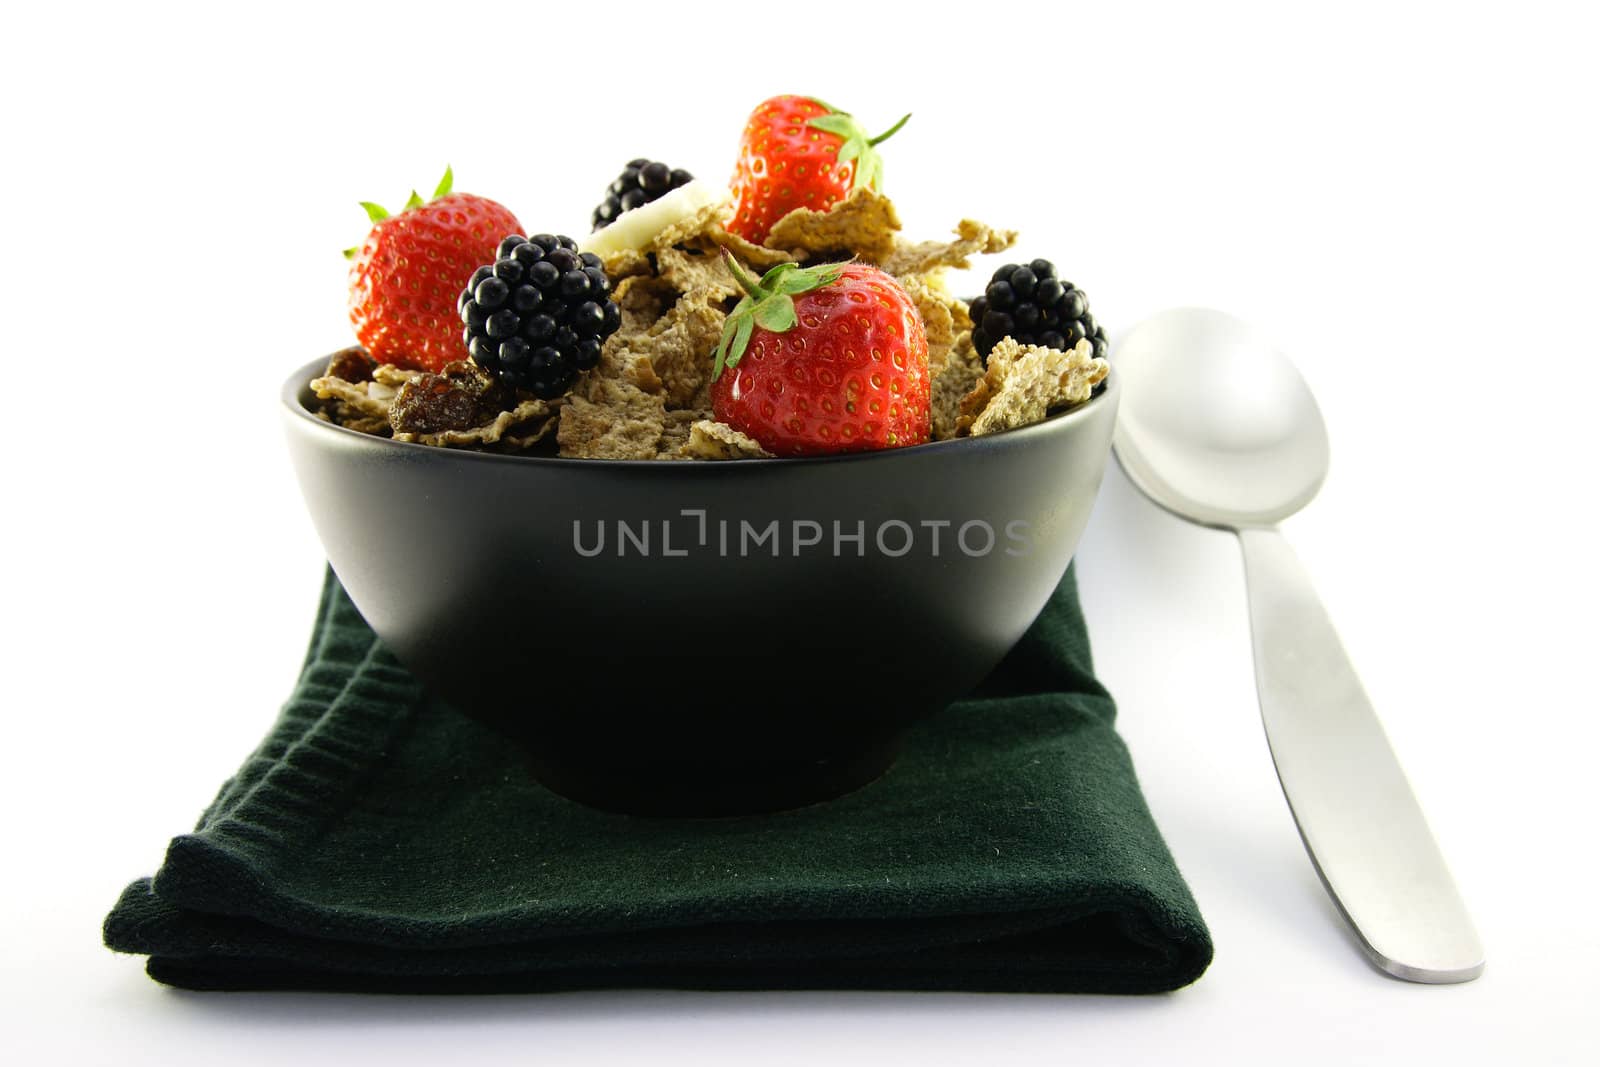 Bran Flakes in a Black Bowl by KeithWilson